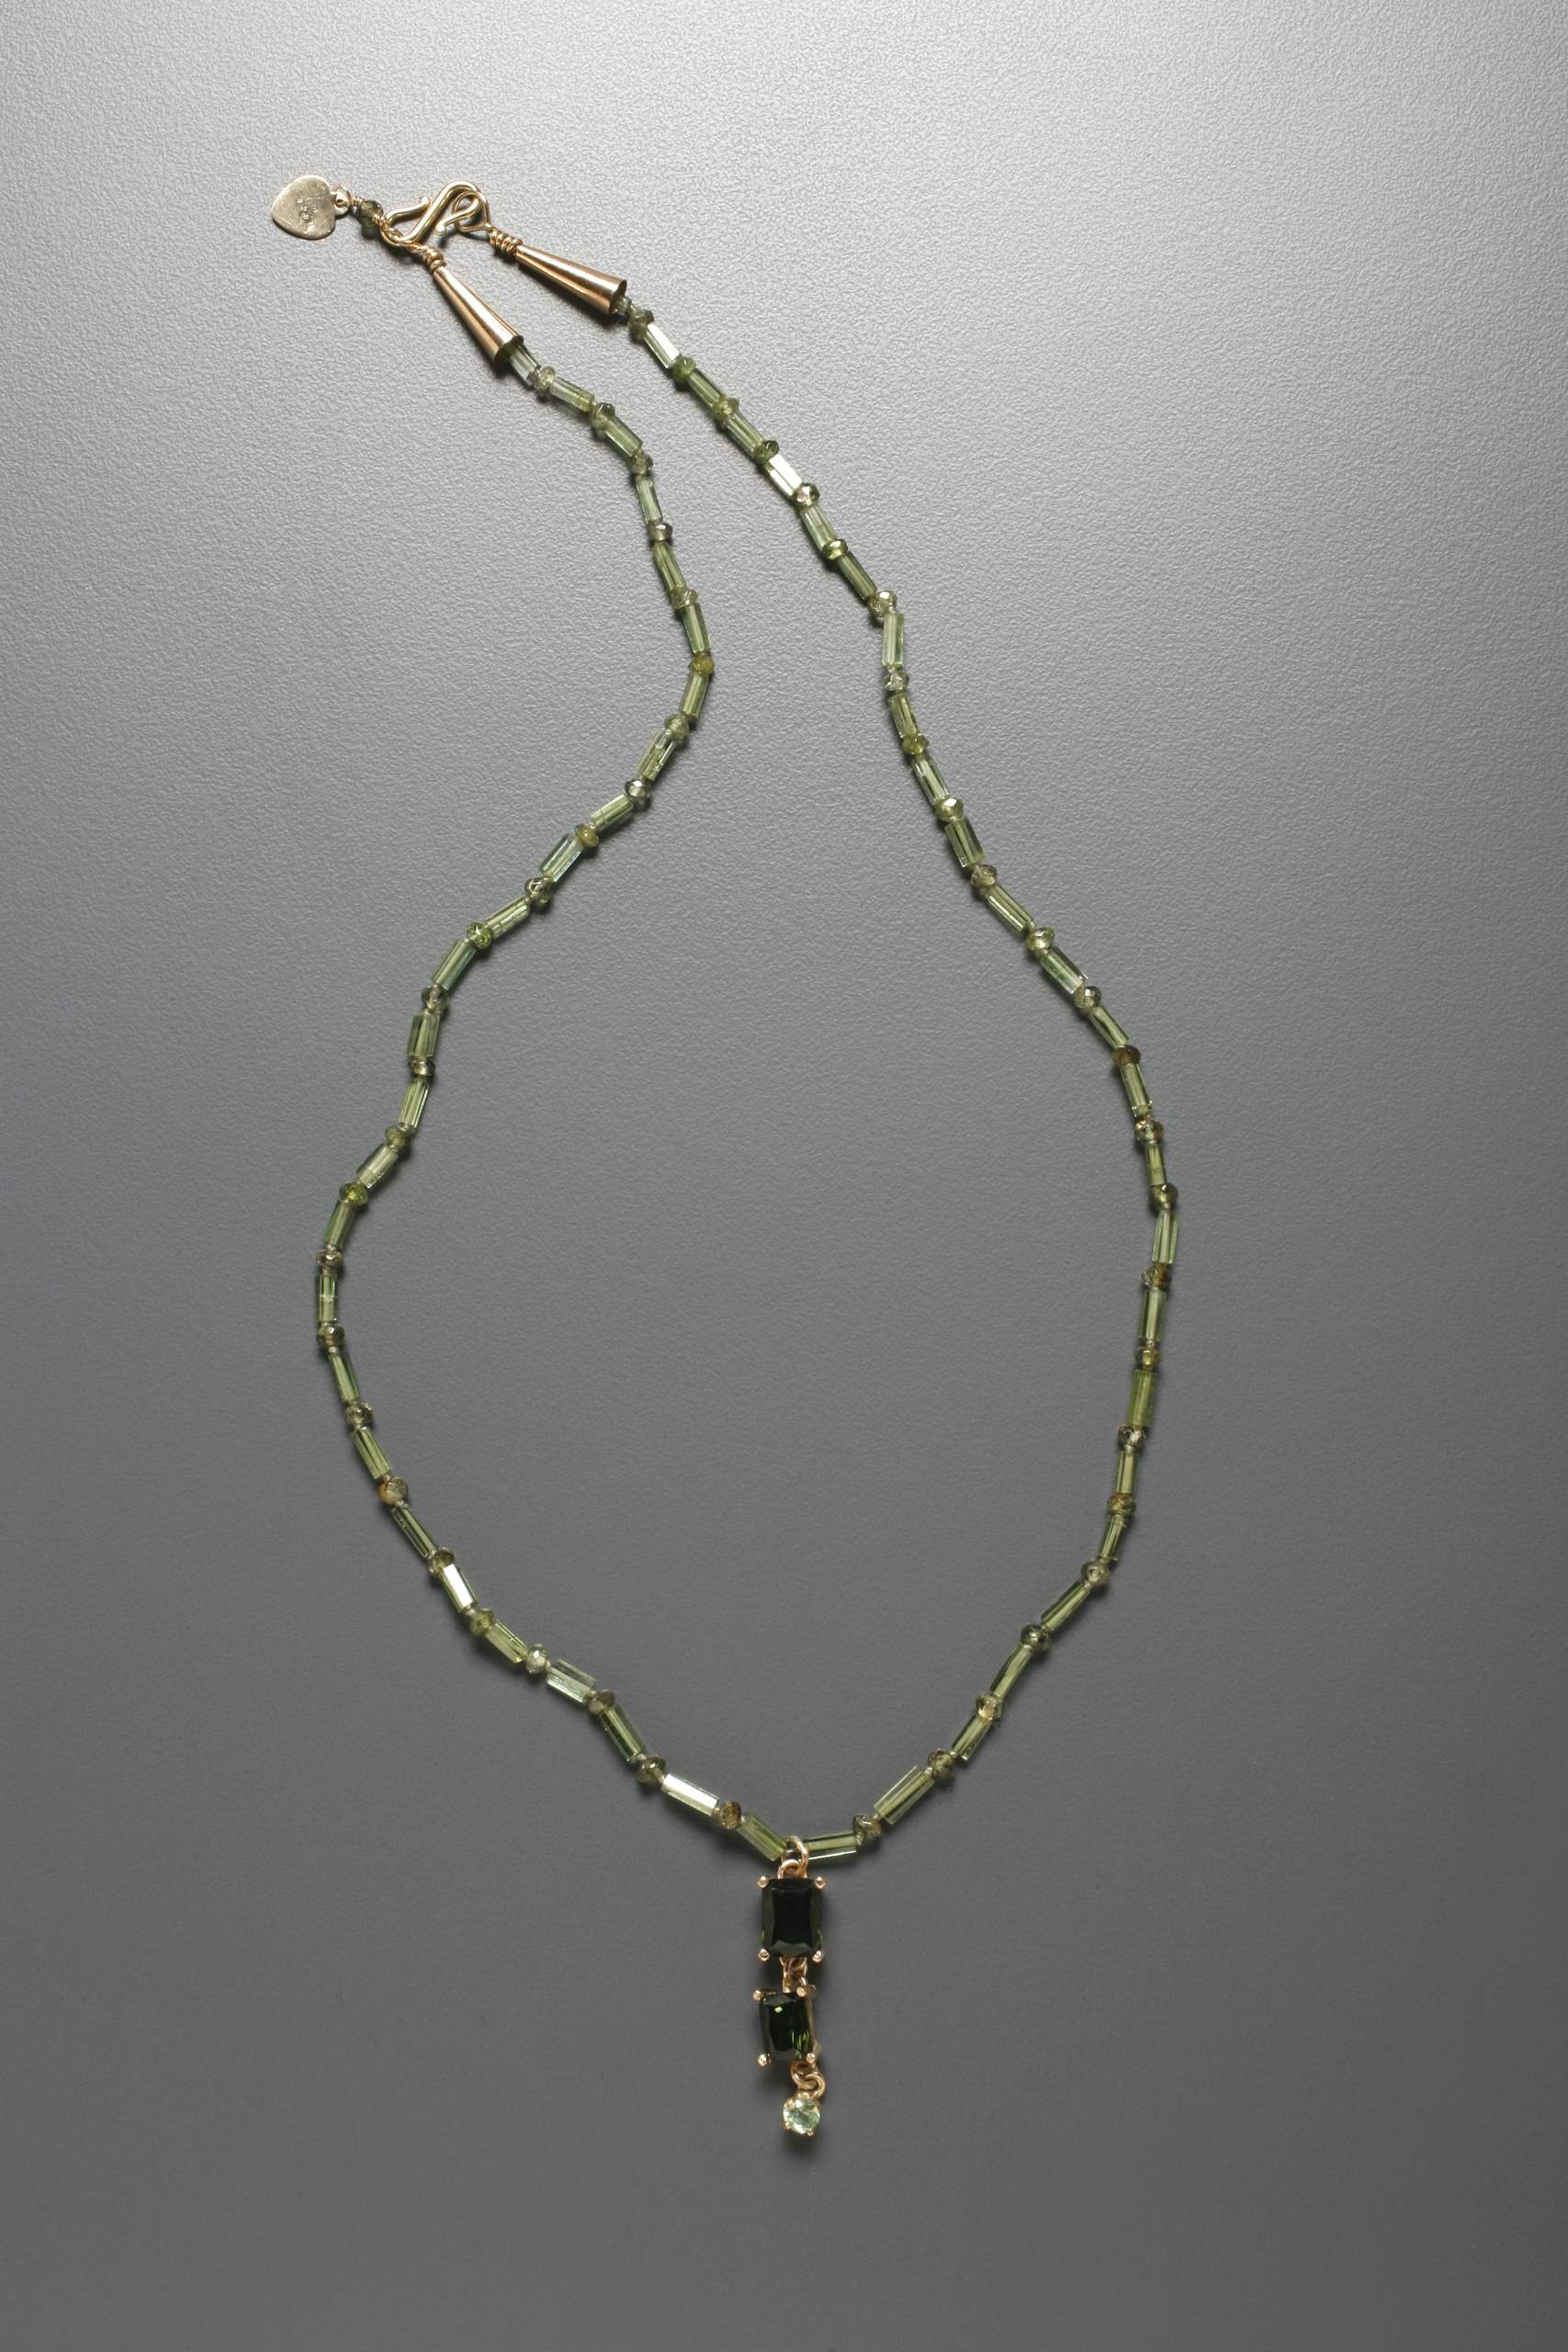 Detail of Faceted Tourmaline Necklace